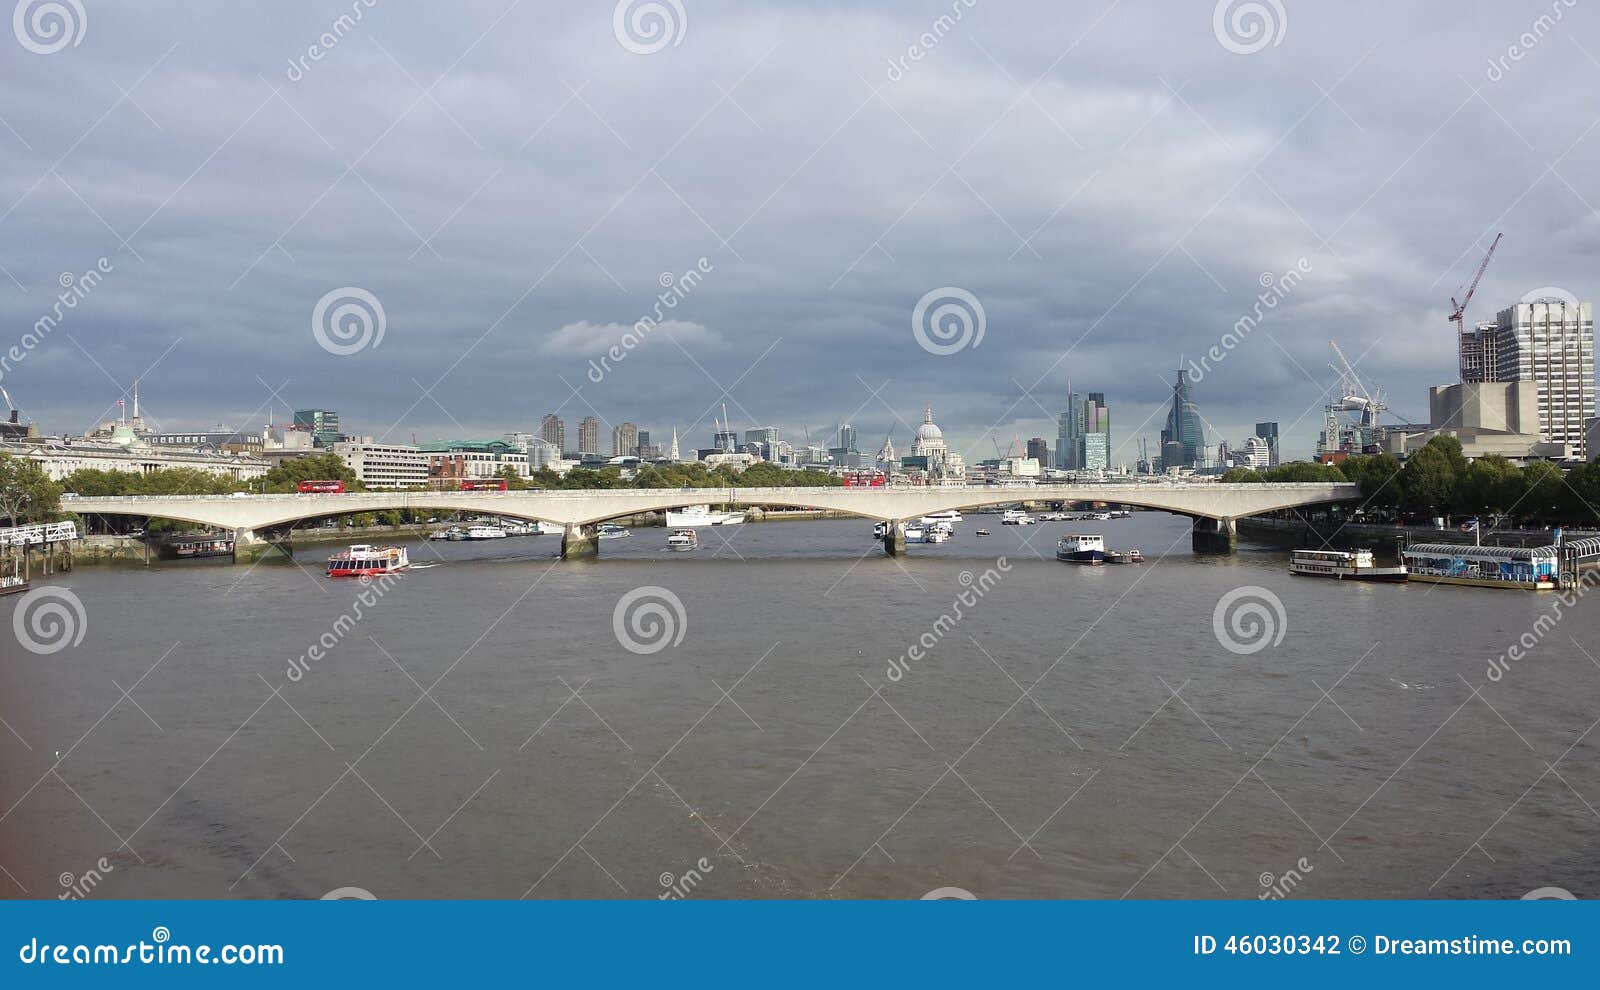 view of the thames, london